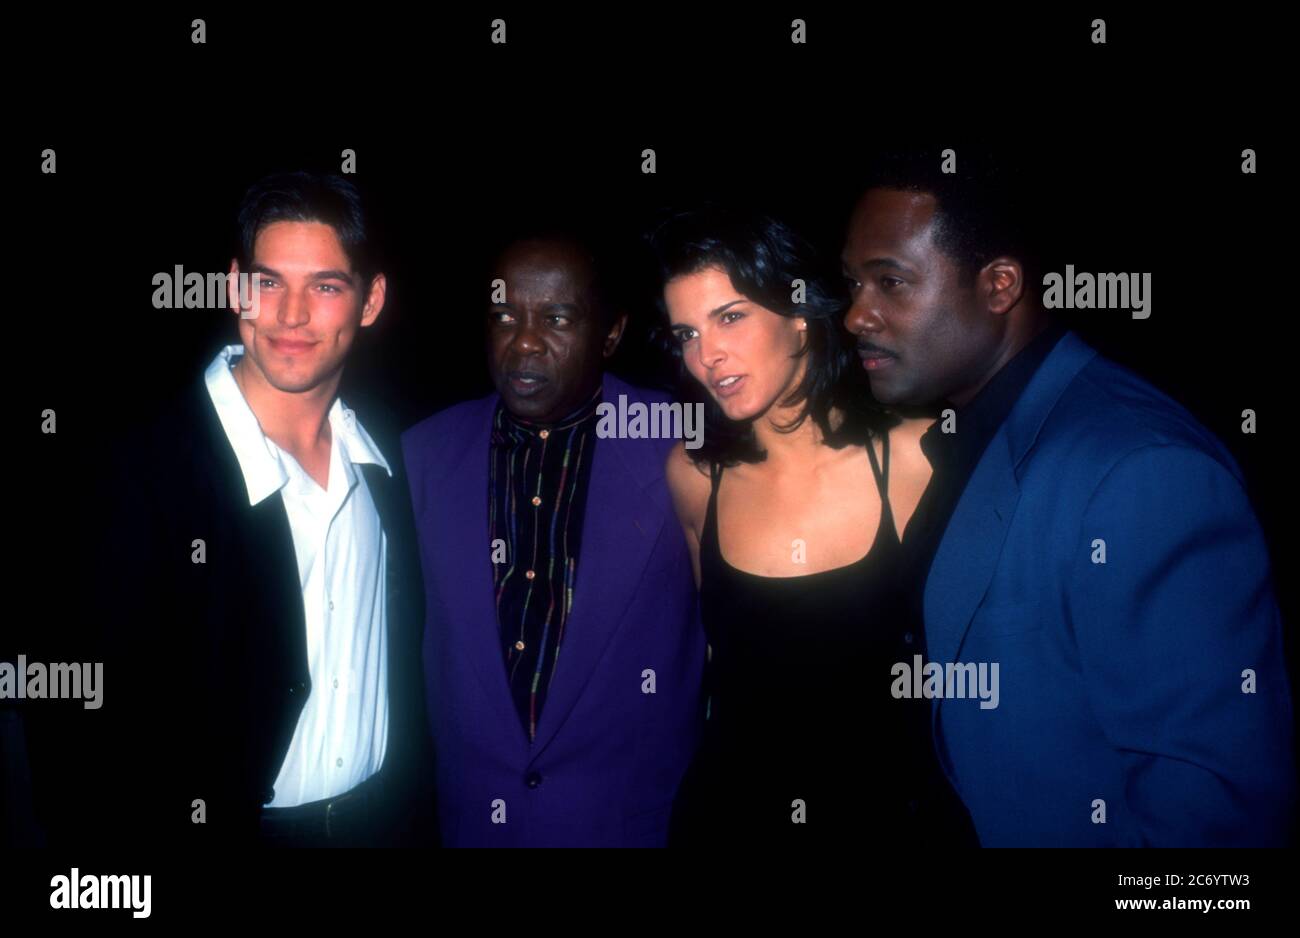 Universal City, California, USA 15th December 1995 (L-R) Actor Eddie Cibrian, singer Lou Rawls, actress Angie Harmon and actor Gregory Alan Williams attend Baywatch & Baywatch Nights Holiday Party on December 15, 1995 at B.B. King's Blues Club in Universal City, California, USA. Photo by Barry King/Alamy Stock Photo Stock Photo